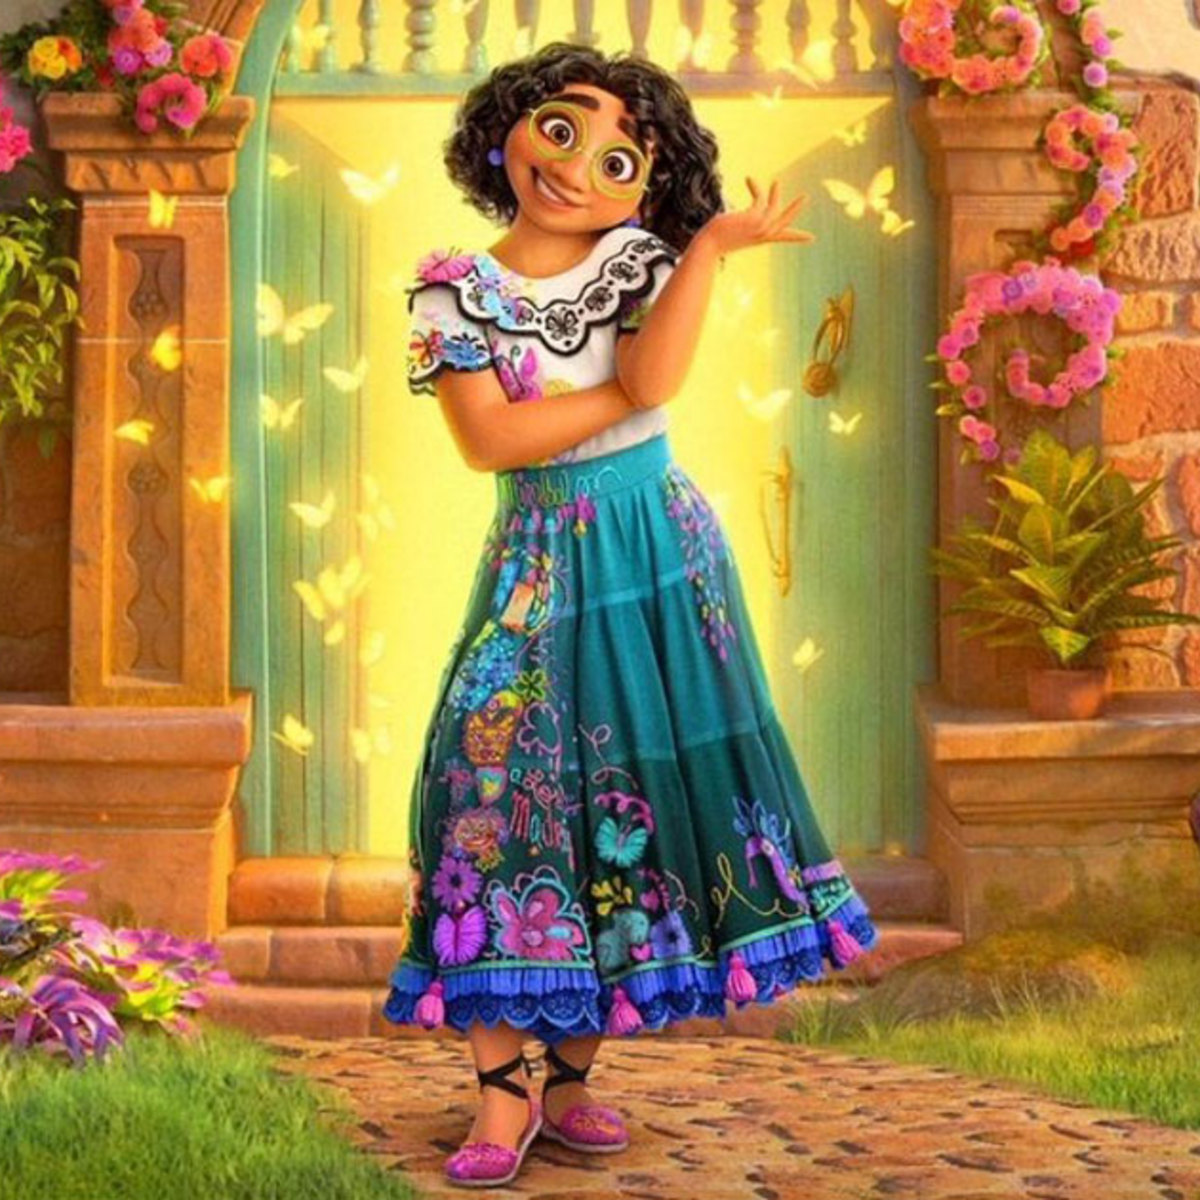 Would Mirabel from “Encanto” be as connected to her family if she lived in  the US? BYU study says yes - BYU News